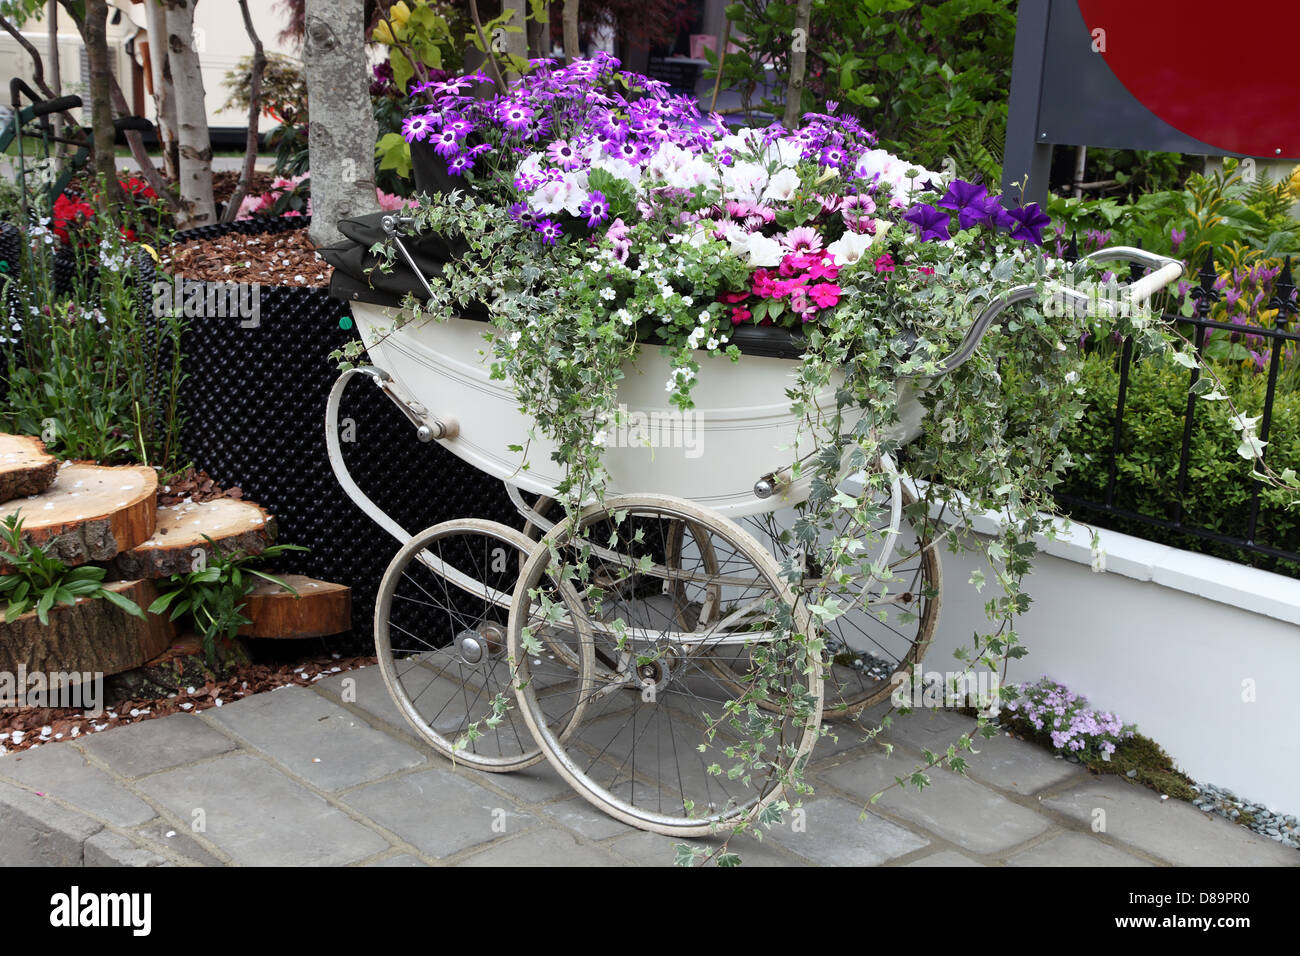 pram used as a planter, Chelsea Flower Show 2013 Stock Photo